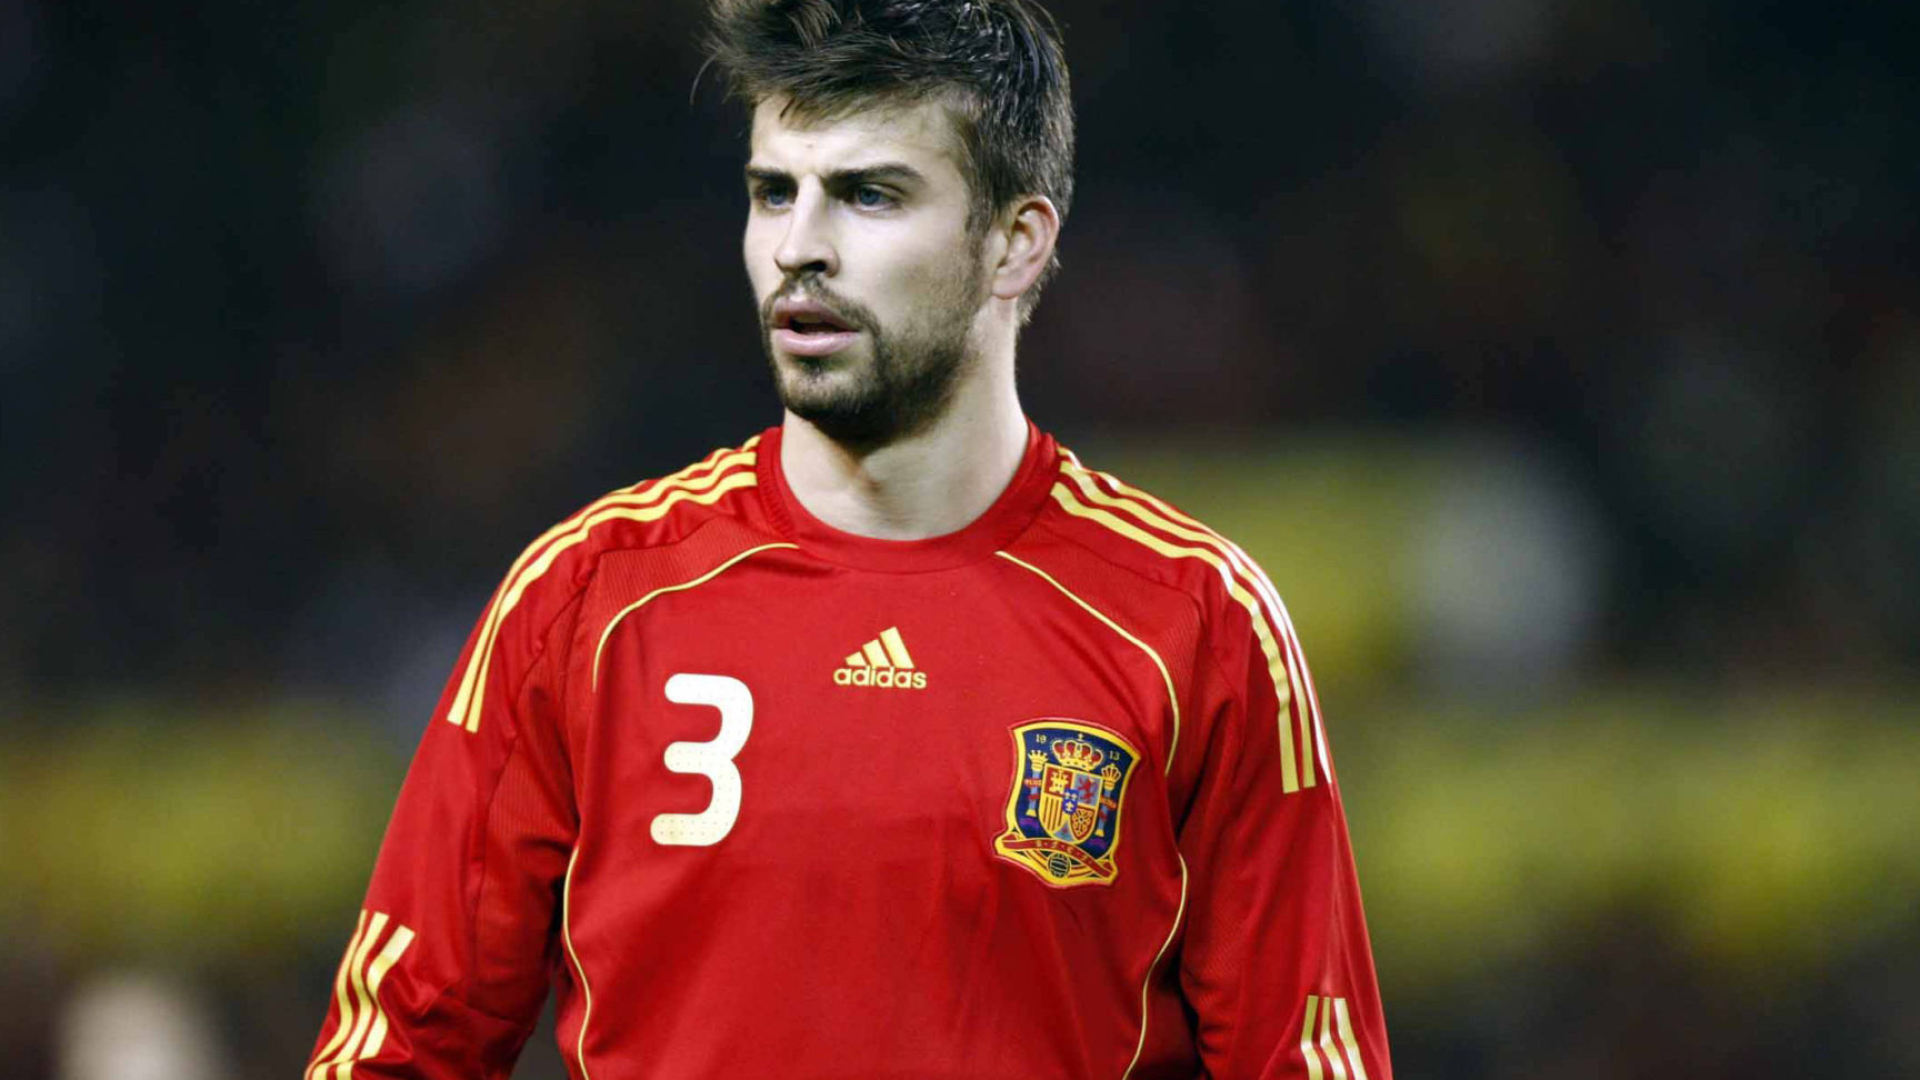 Gerard Pique: Signed with FC Barcelona in 2008. 1920x1080 Full HD Wallpaper.